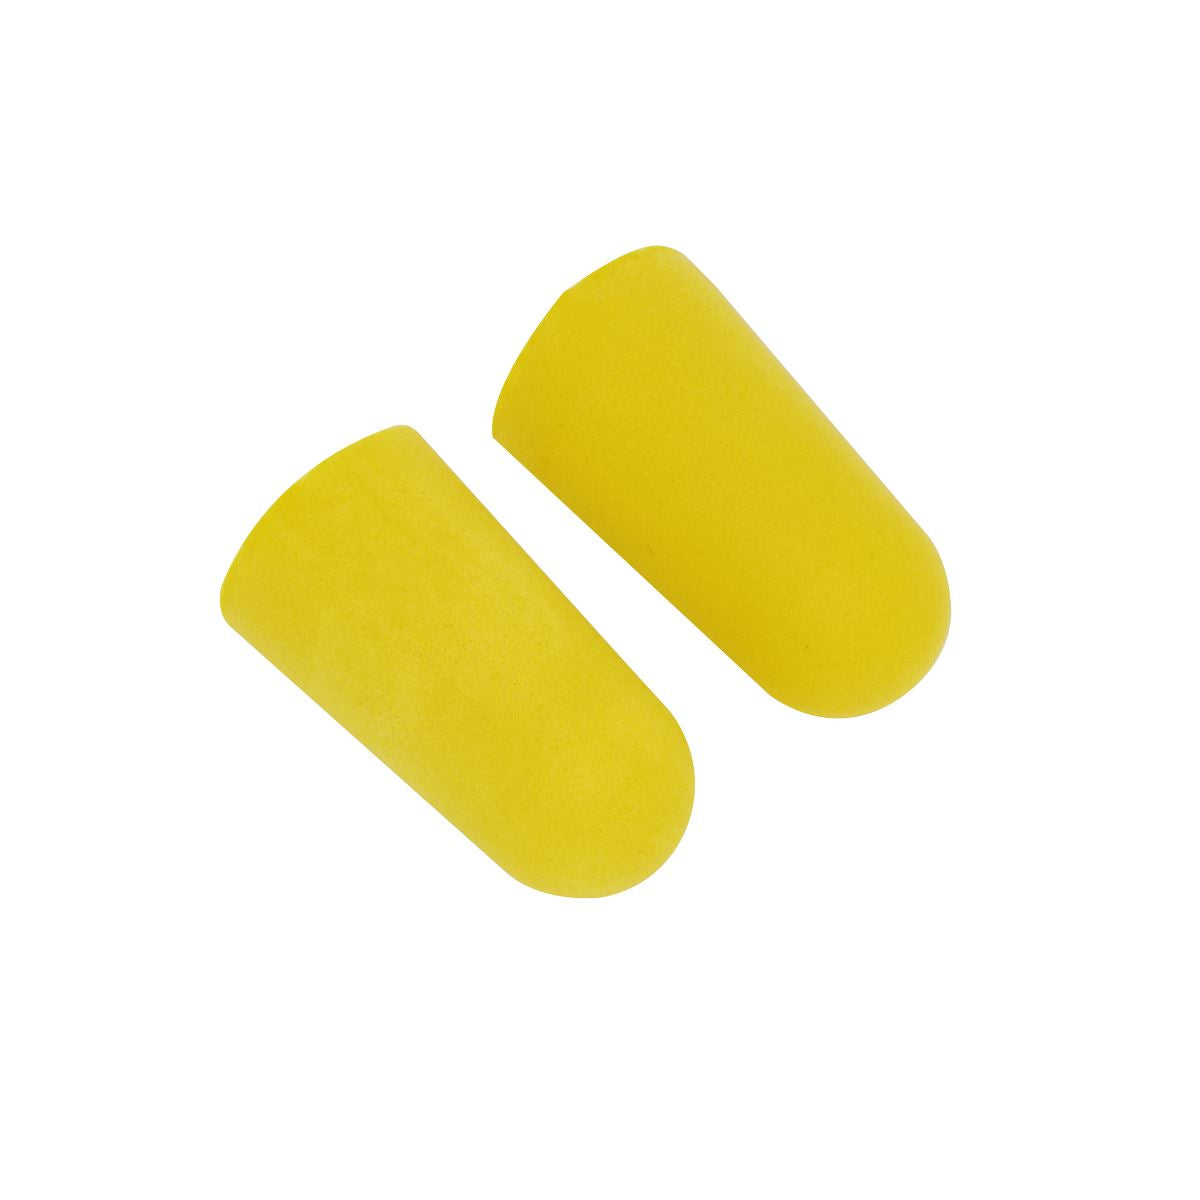 Worksafe by Sealey Ear Plugs Dispenser Refill Disposable - 500 Pairs